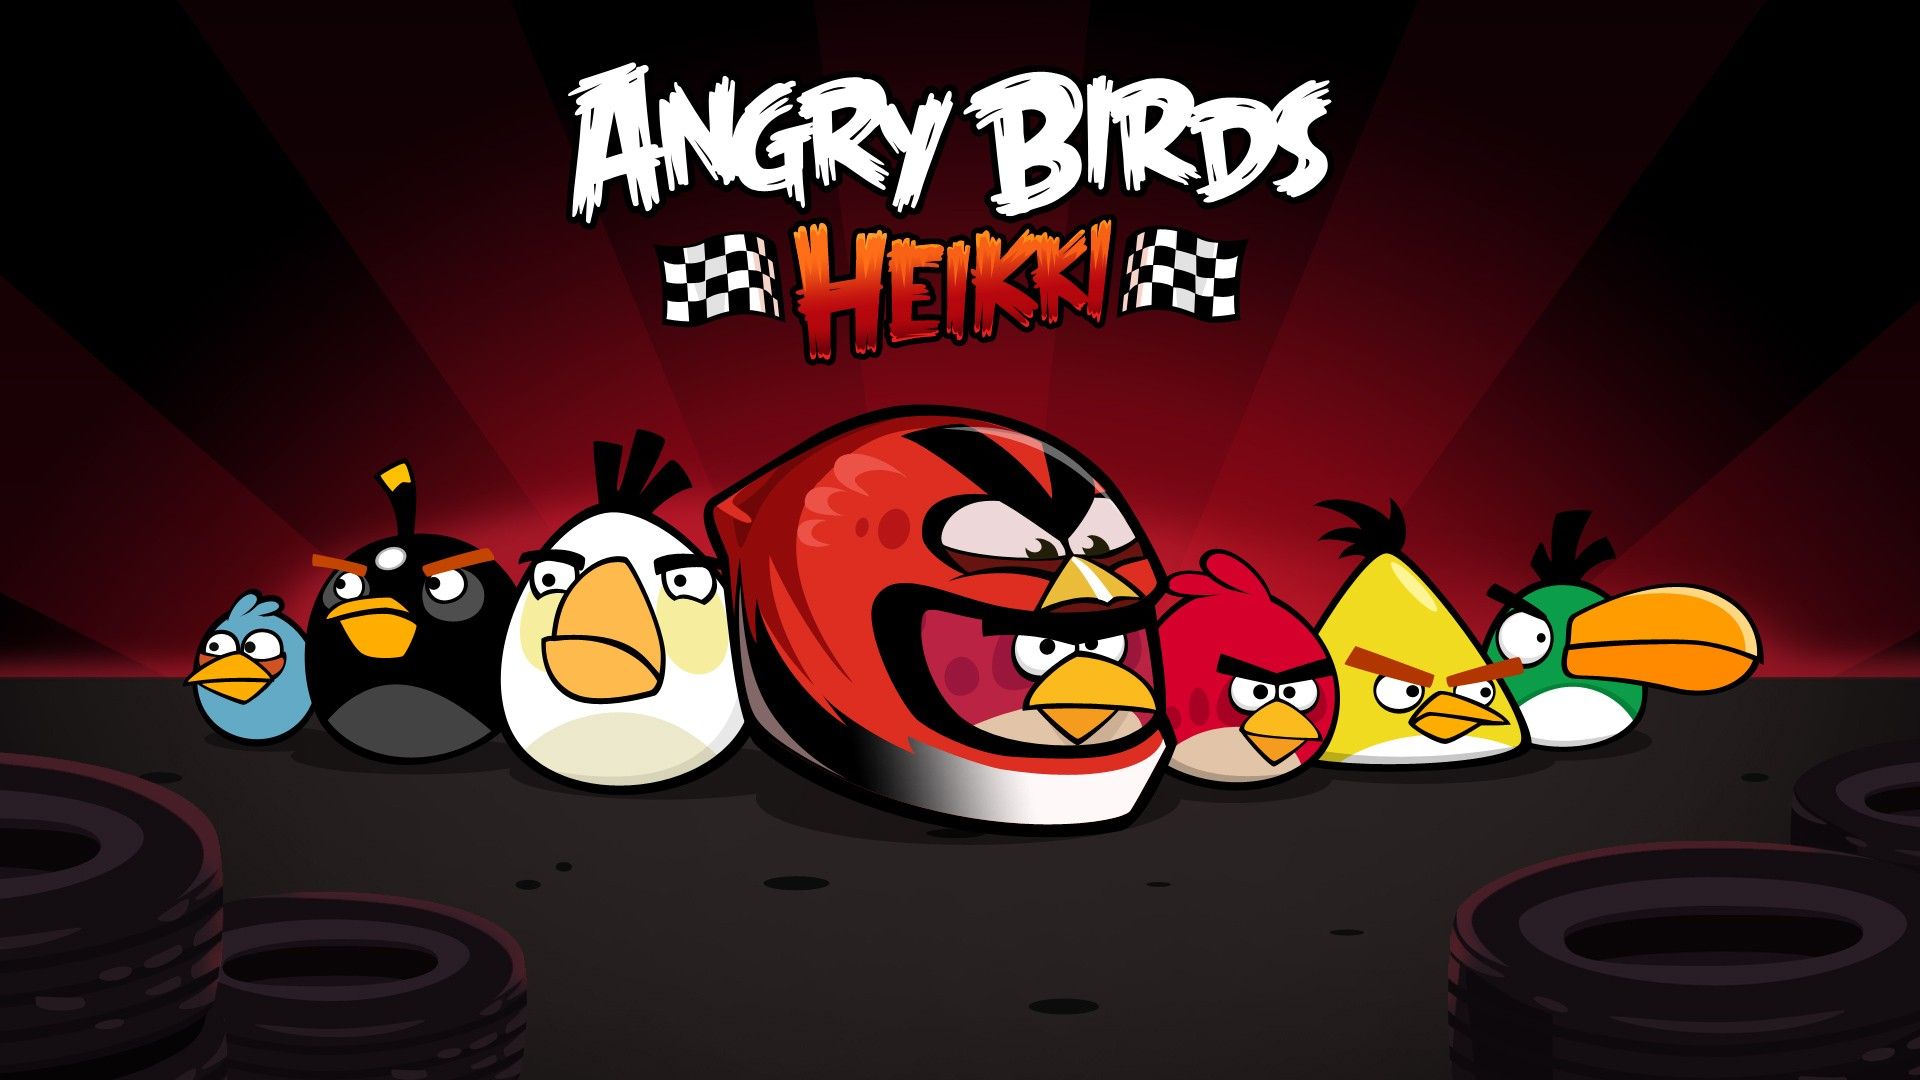 20 Best HD Angry Birds Wallpapers - DezineGuide